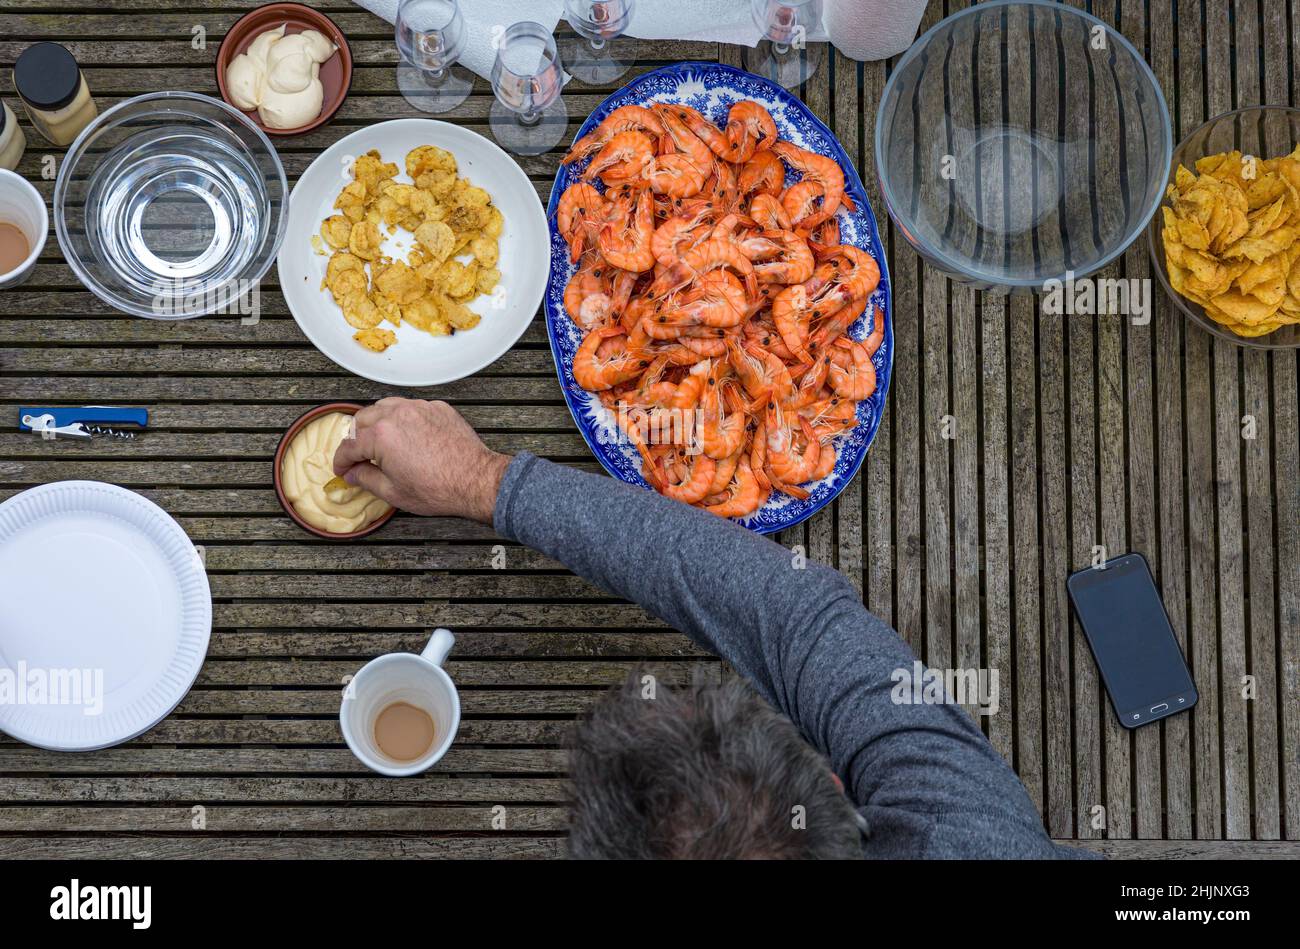 Overhead view of man enjoying prawns and mayonnaise in an outdoor setting Stock Photo